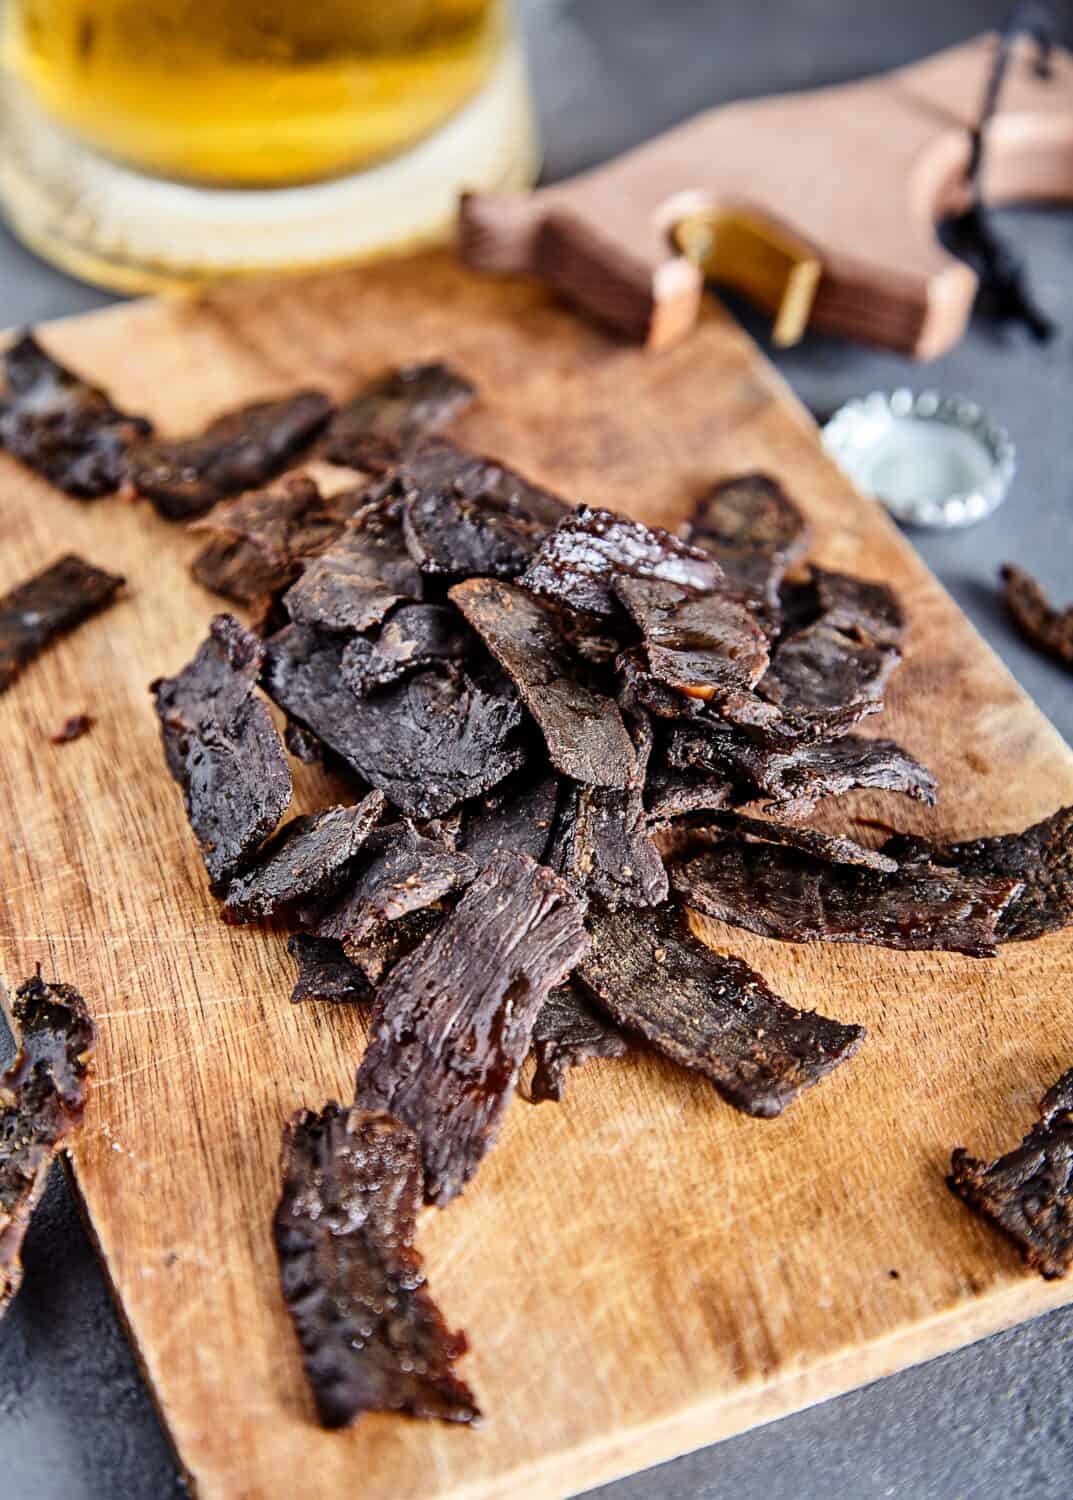 jerky preparation and packaging